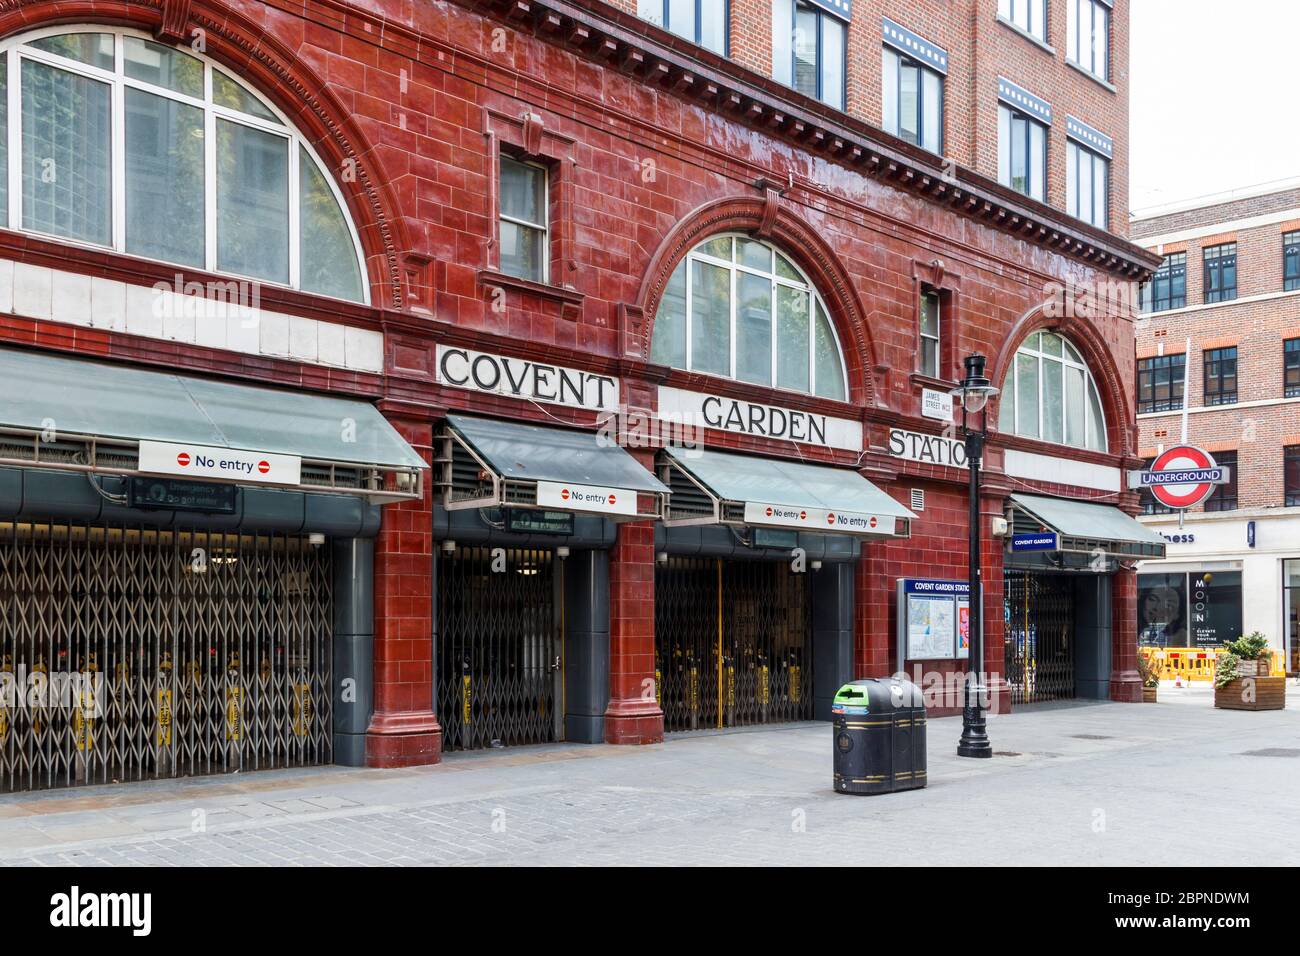 Covent Garden underground station on a Sunday, normally busy, closed during the coronavirus pandemic lockdown, London, UK Stock Photo